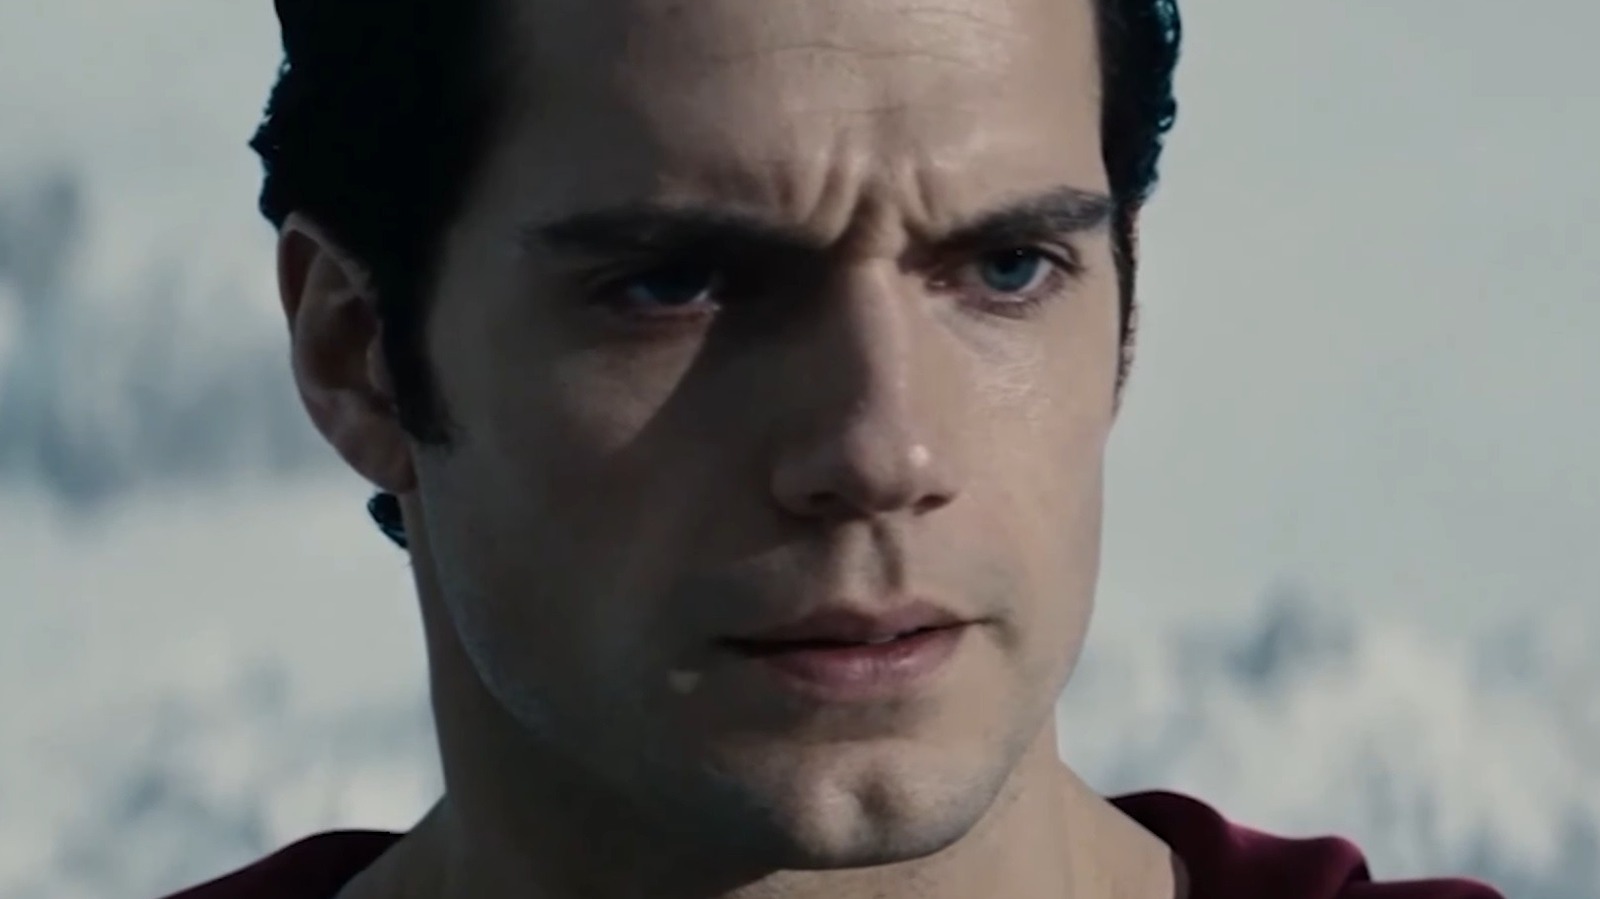 Man of Steel: Christopher Nolan Opposed the Ending, DC Comics Advised on It